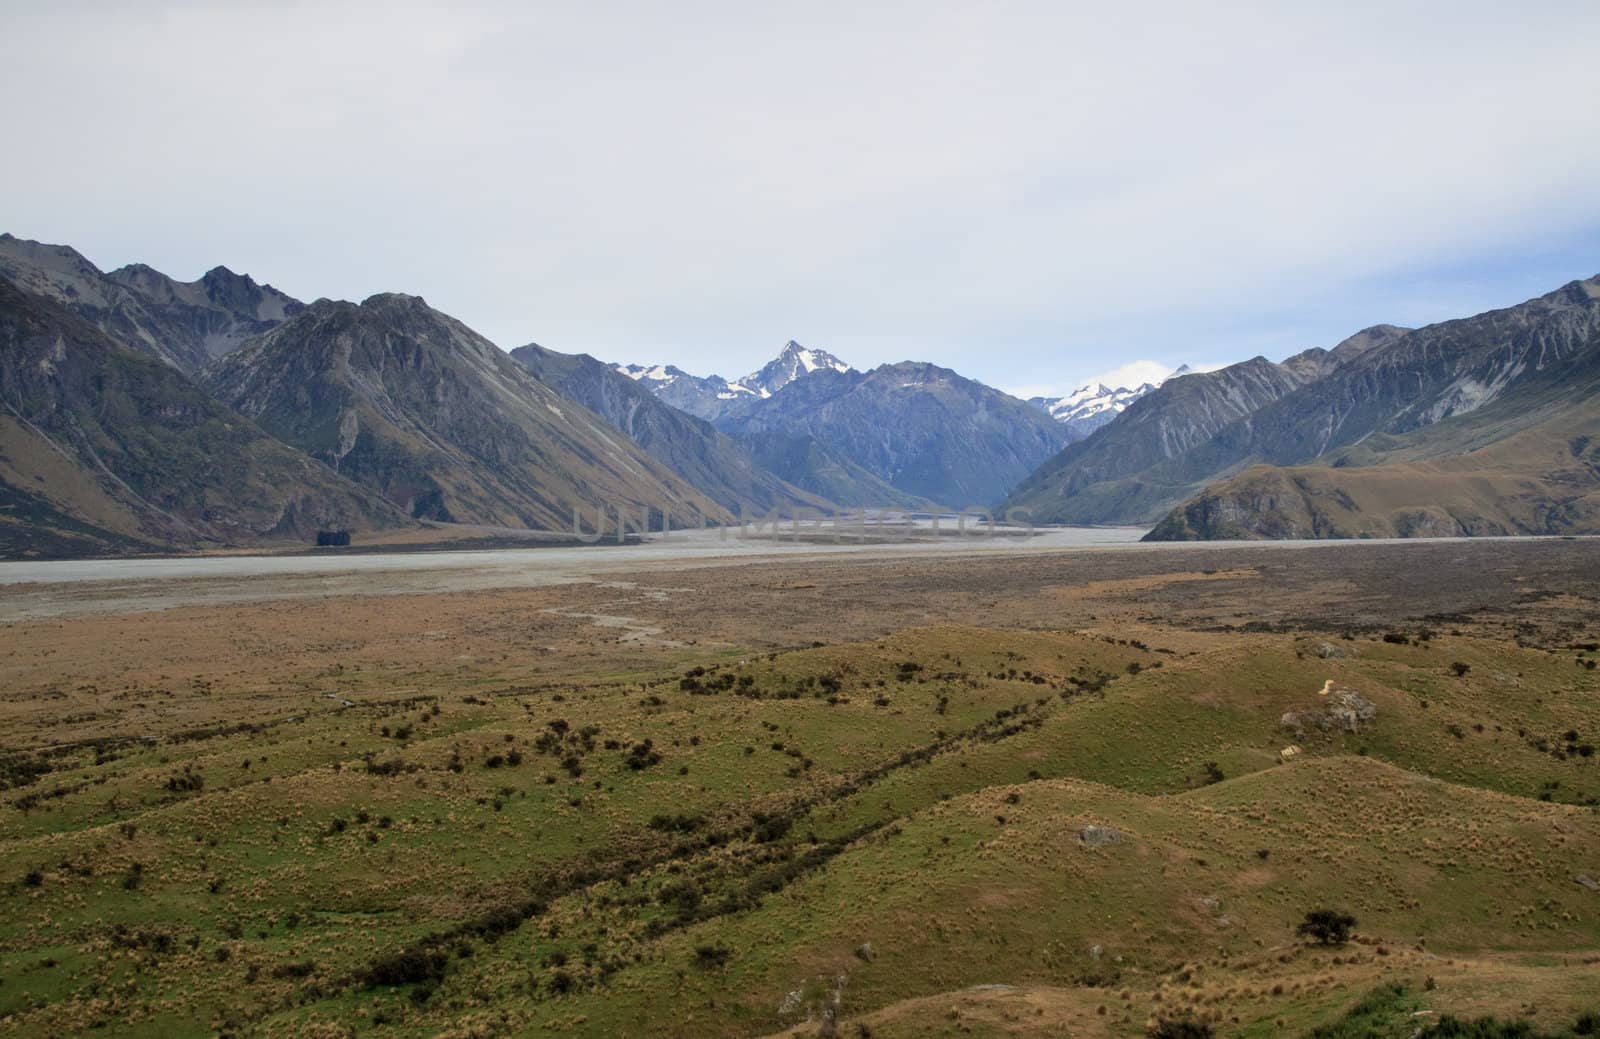 Mount Cook over a grassy plain by steheap